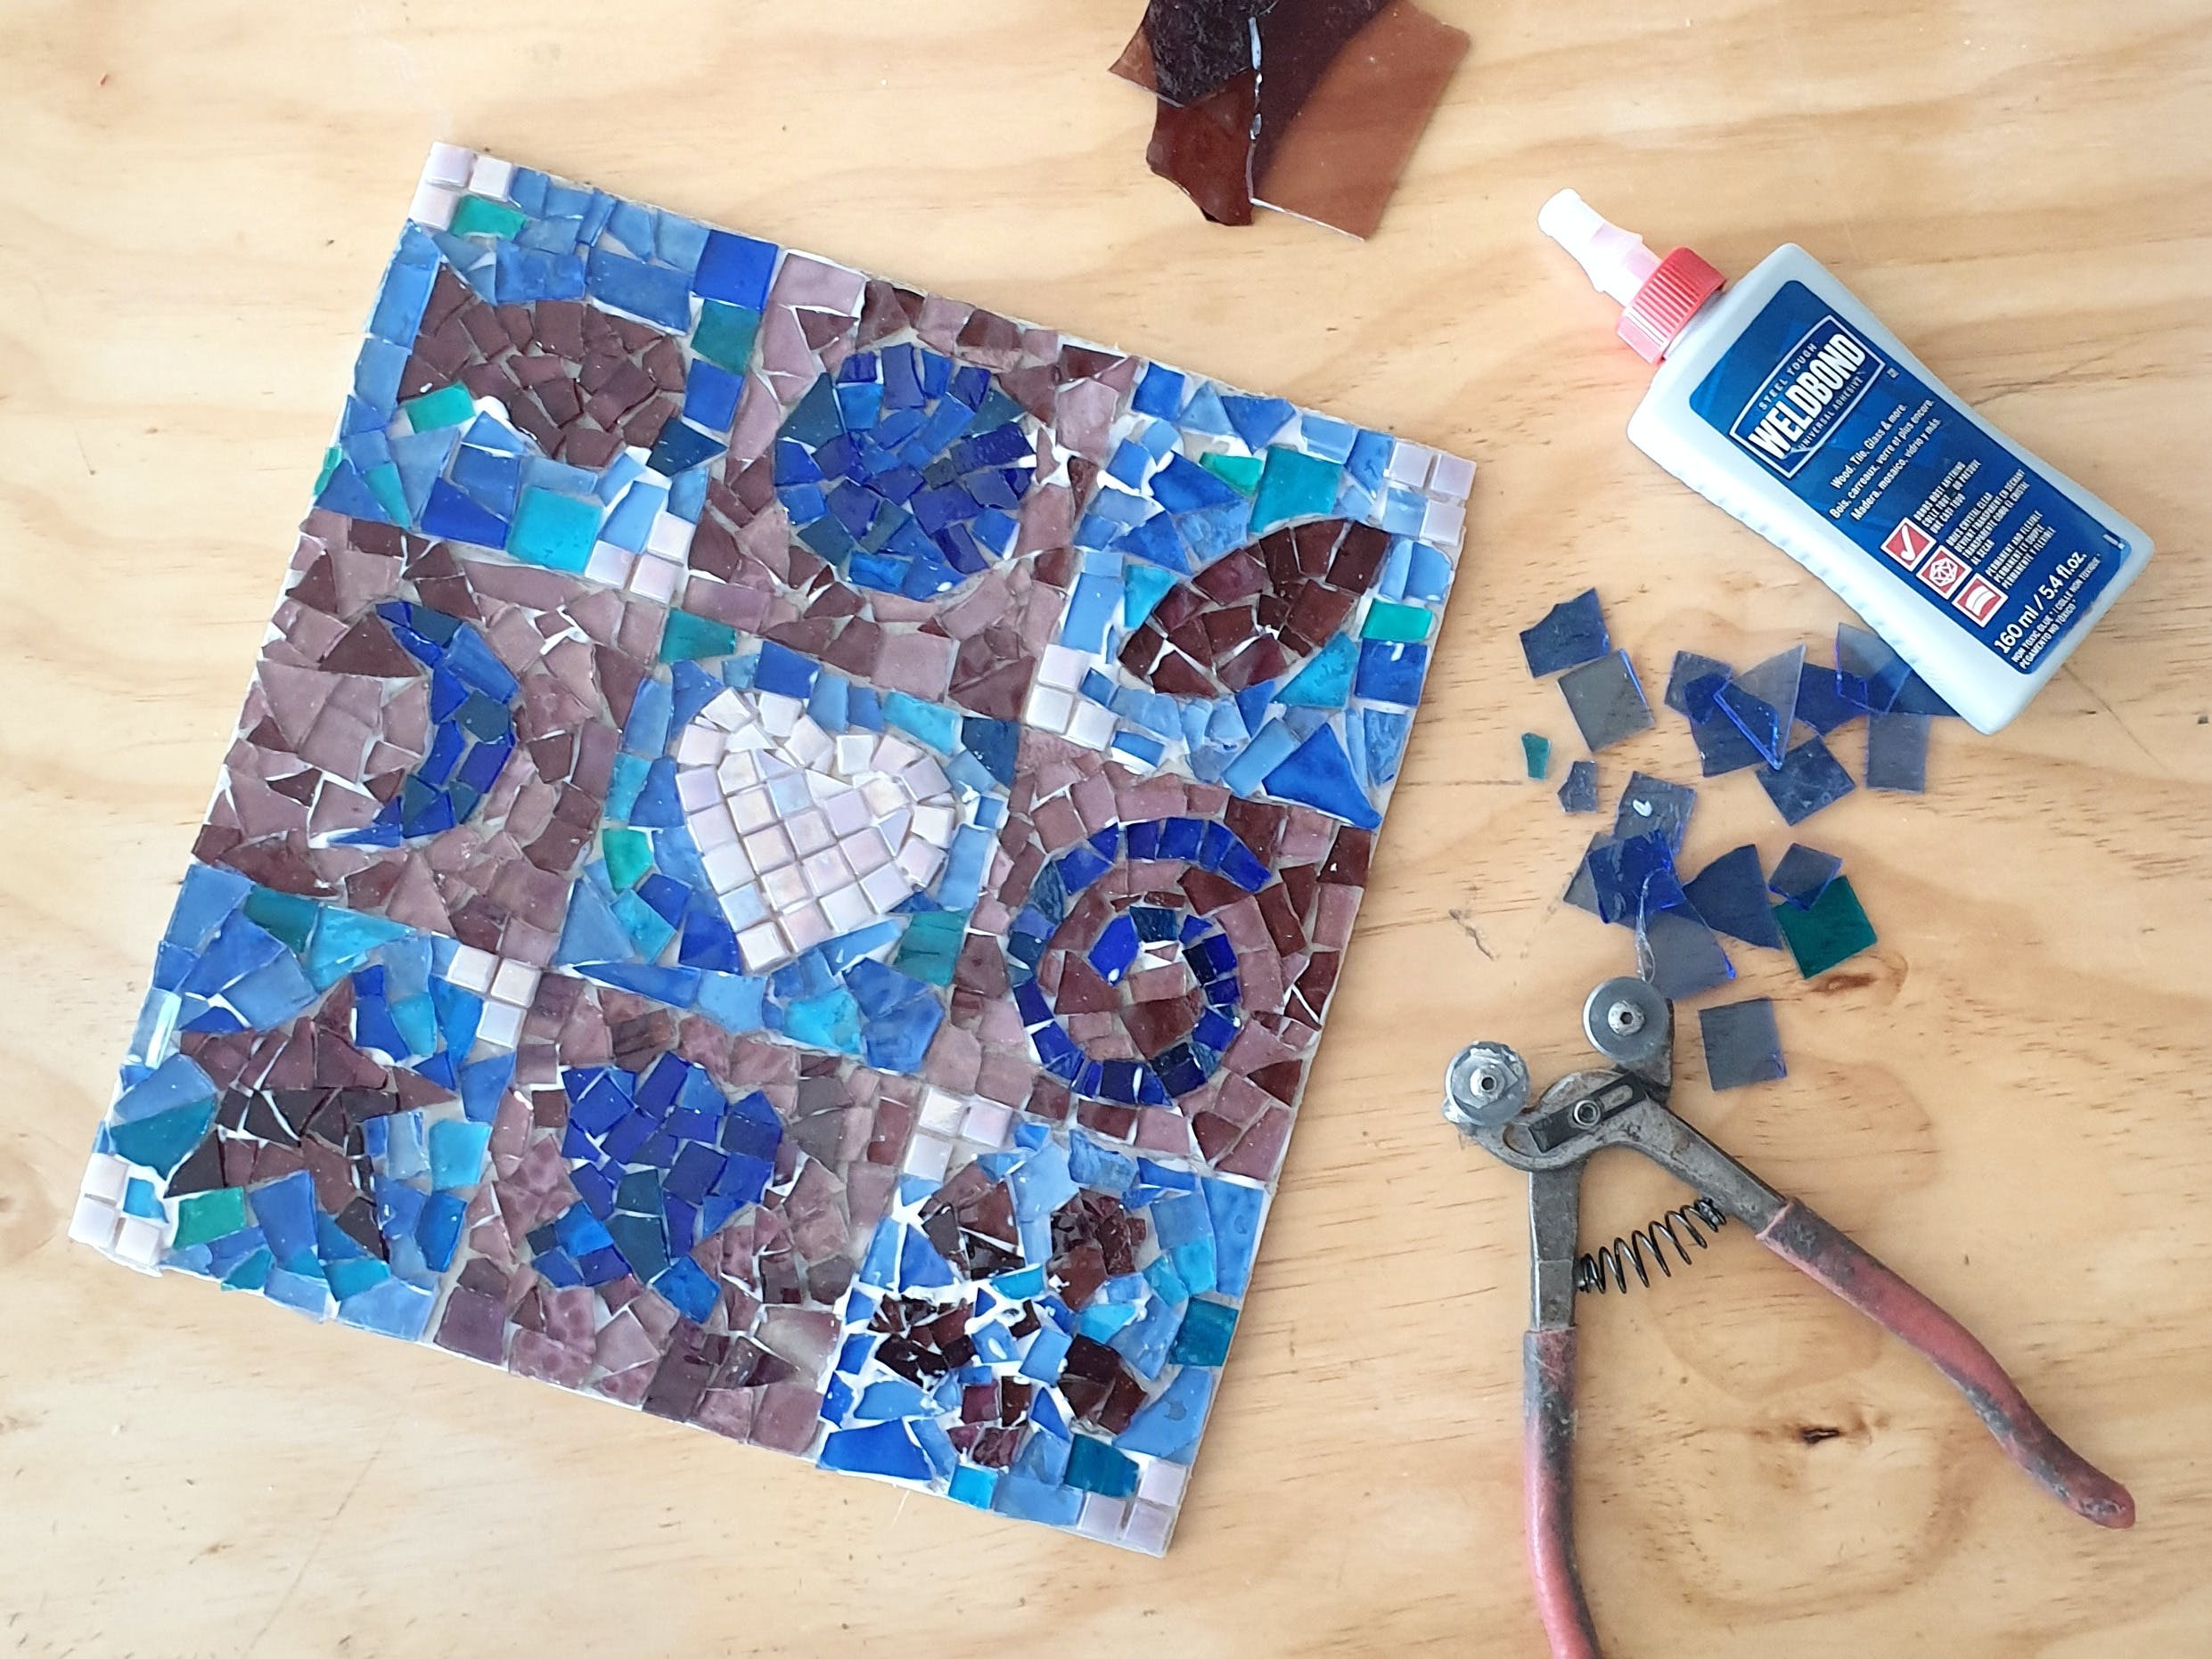 Intro to Mosaics Weekend with Leadlight By Ettore - Accommodation Brunswick Heads